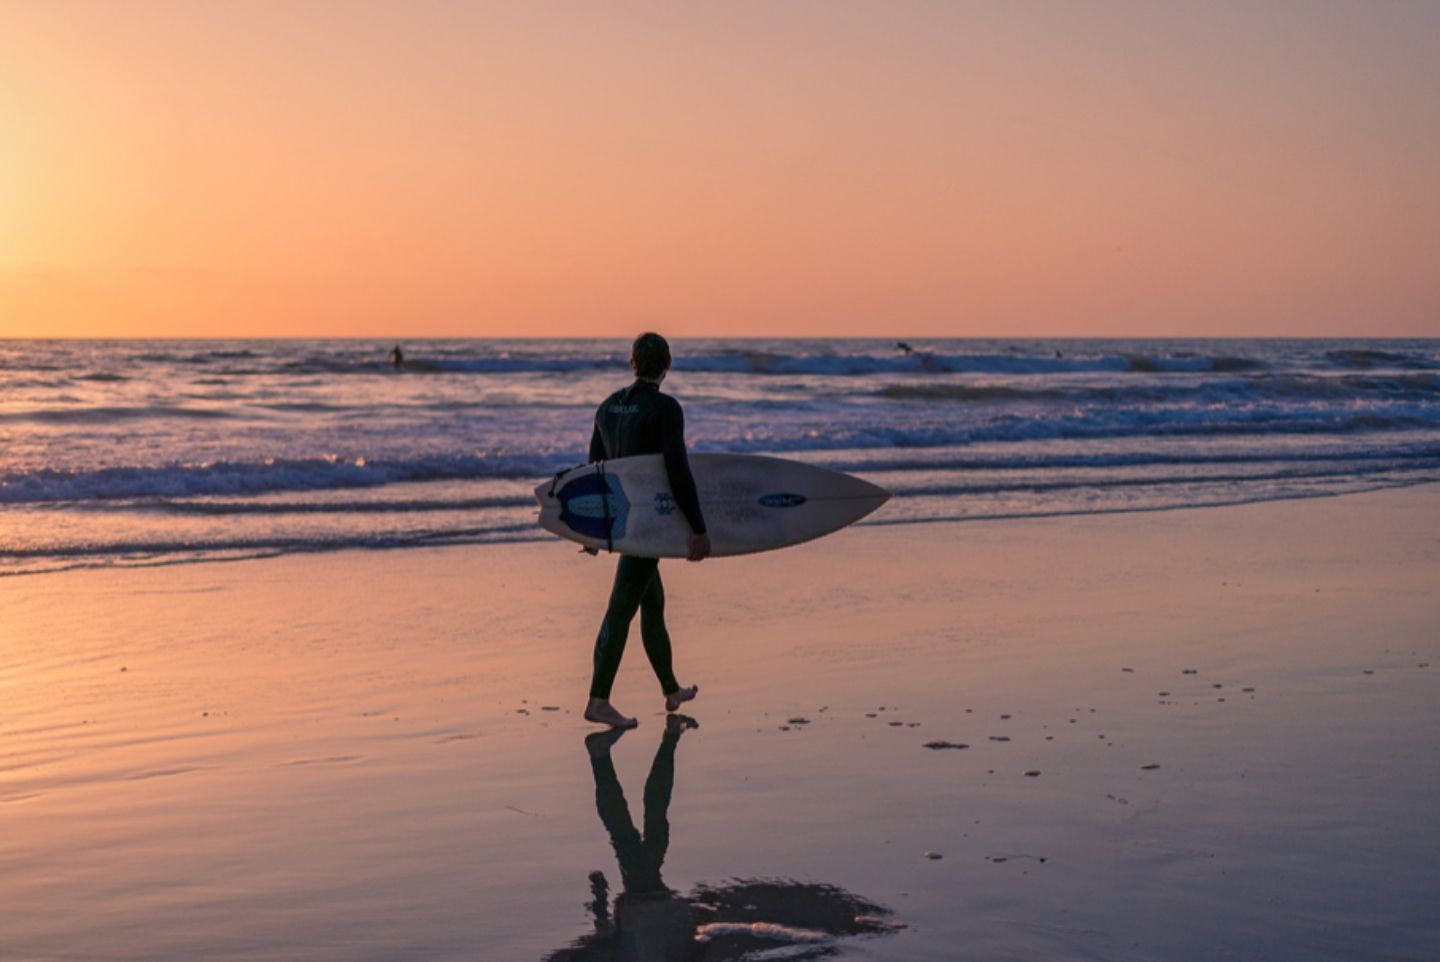 Sunset time and surfer holding surfboard on the beaches of San Diego. The water is calm and the sky is reflecting off the water and sand. 